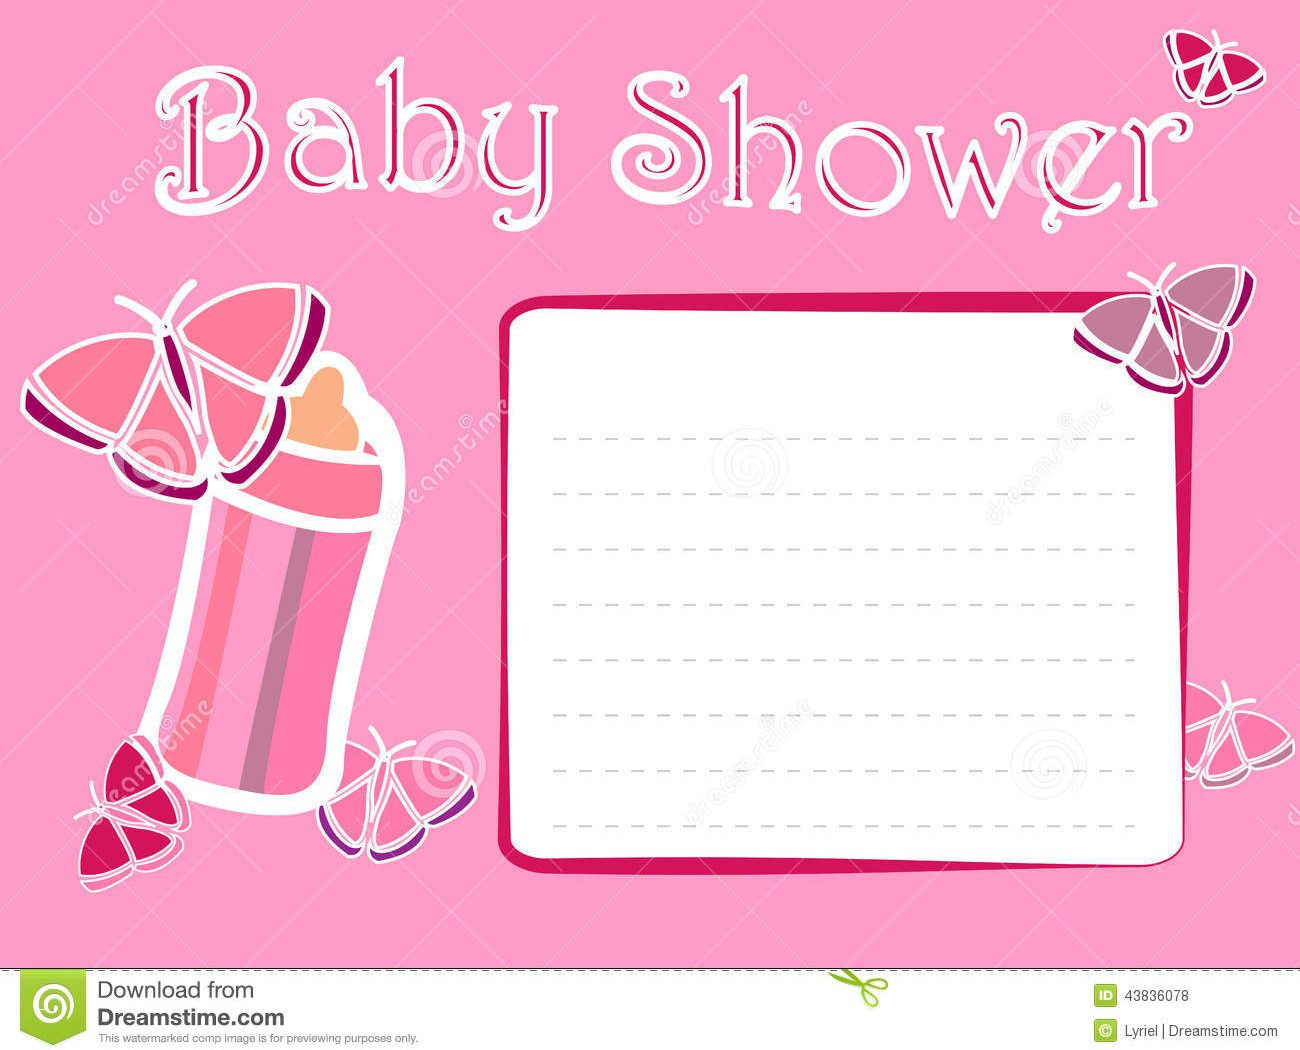 Full Size of Baby Shower:63+ Delightful Cheap Baby Shower Invitations Image Inspirations Ideas Para Baby Shower Baby Shower Para Niño Baby Shower Video Baby Shower Party Themes Baby Shower Wording Save The Date Baby Shower